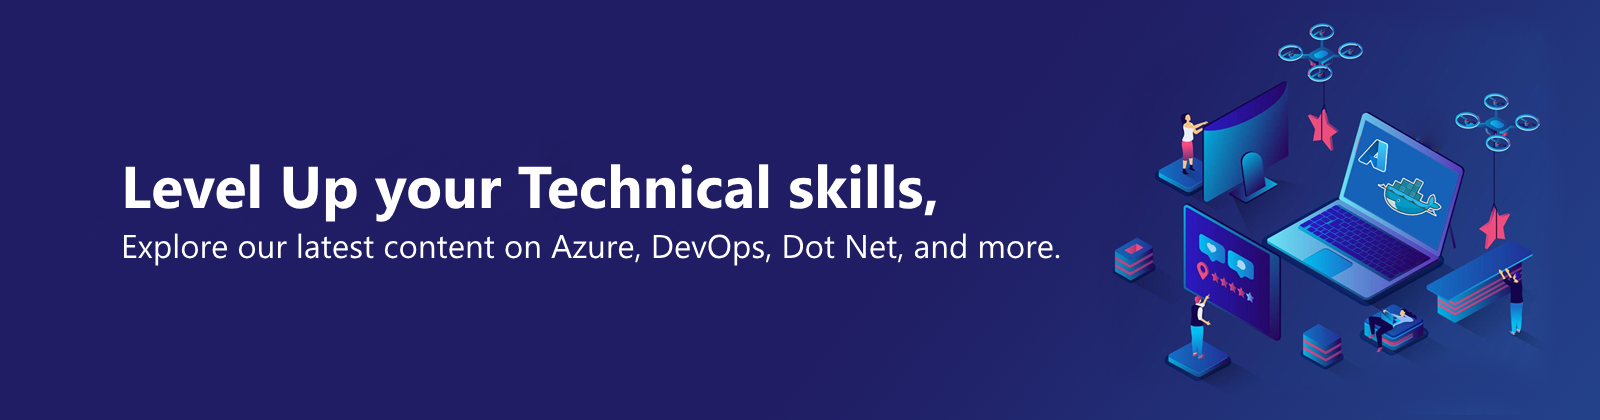 Level up your technical skills